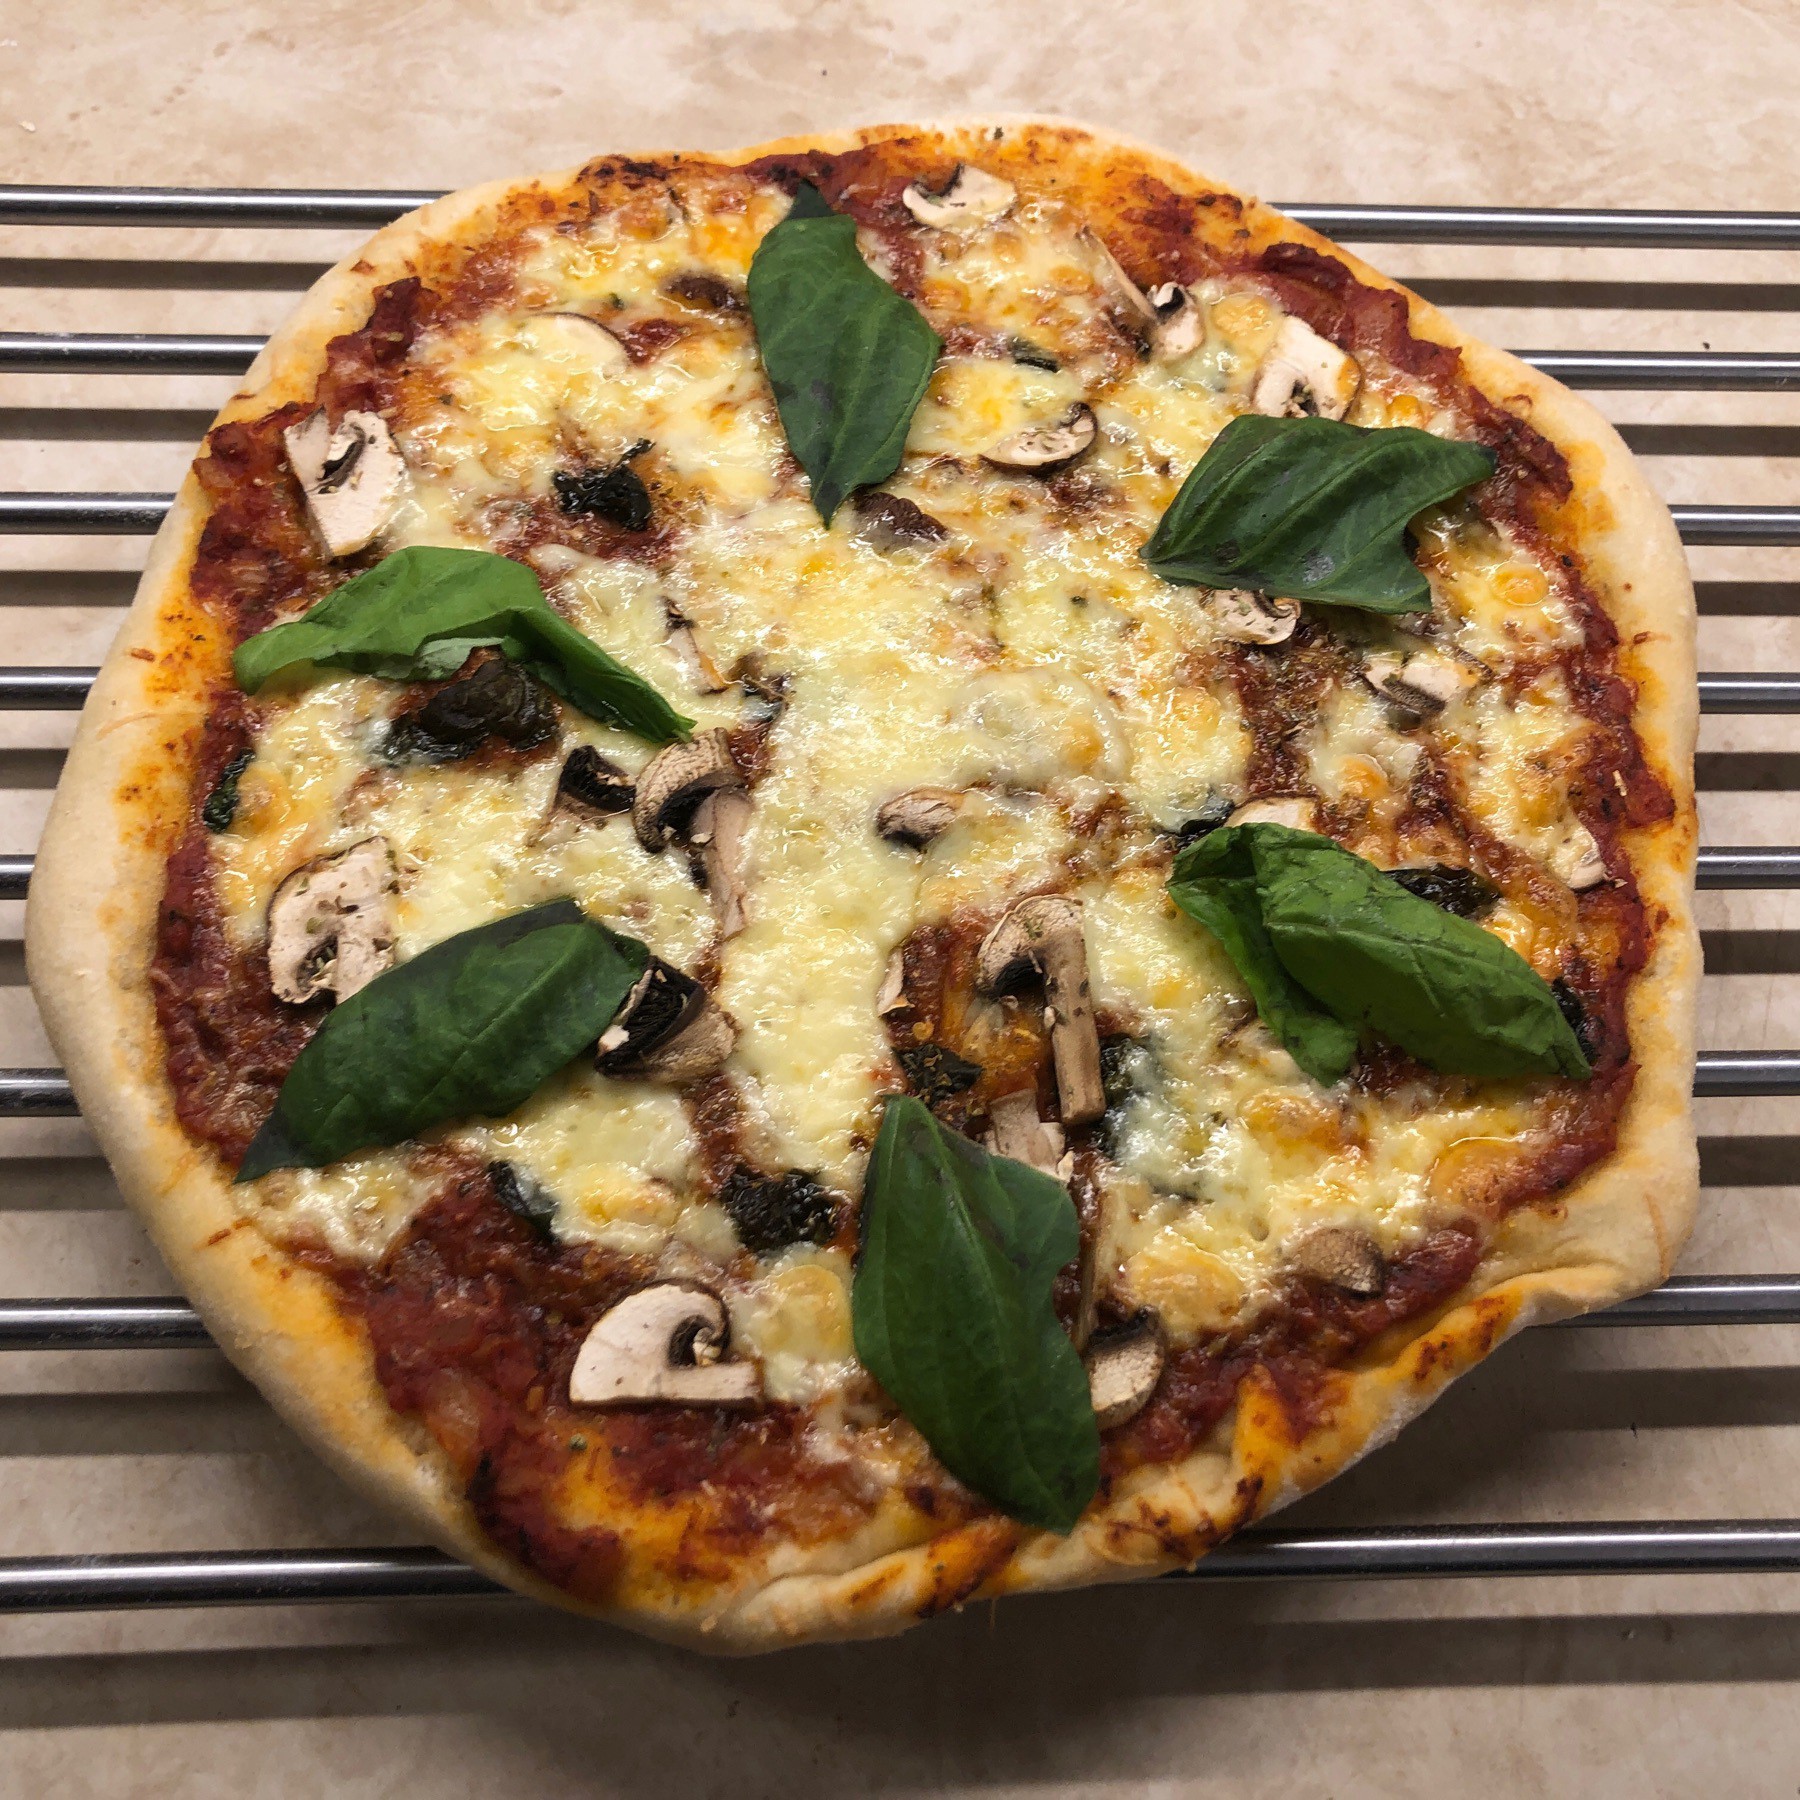 Cheese and mushroom pizza on cooling rack.